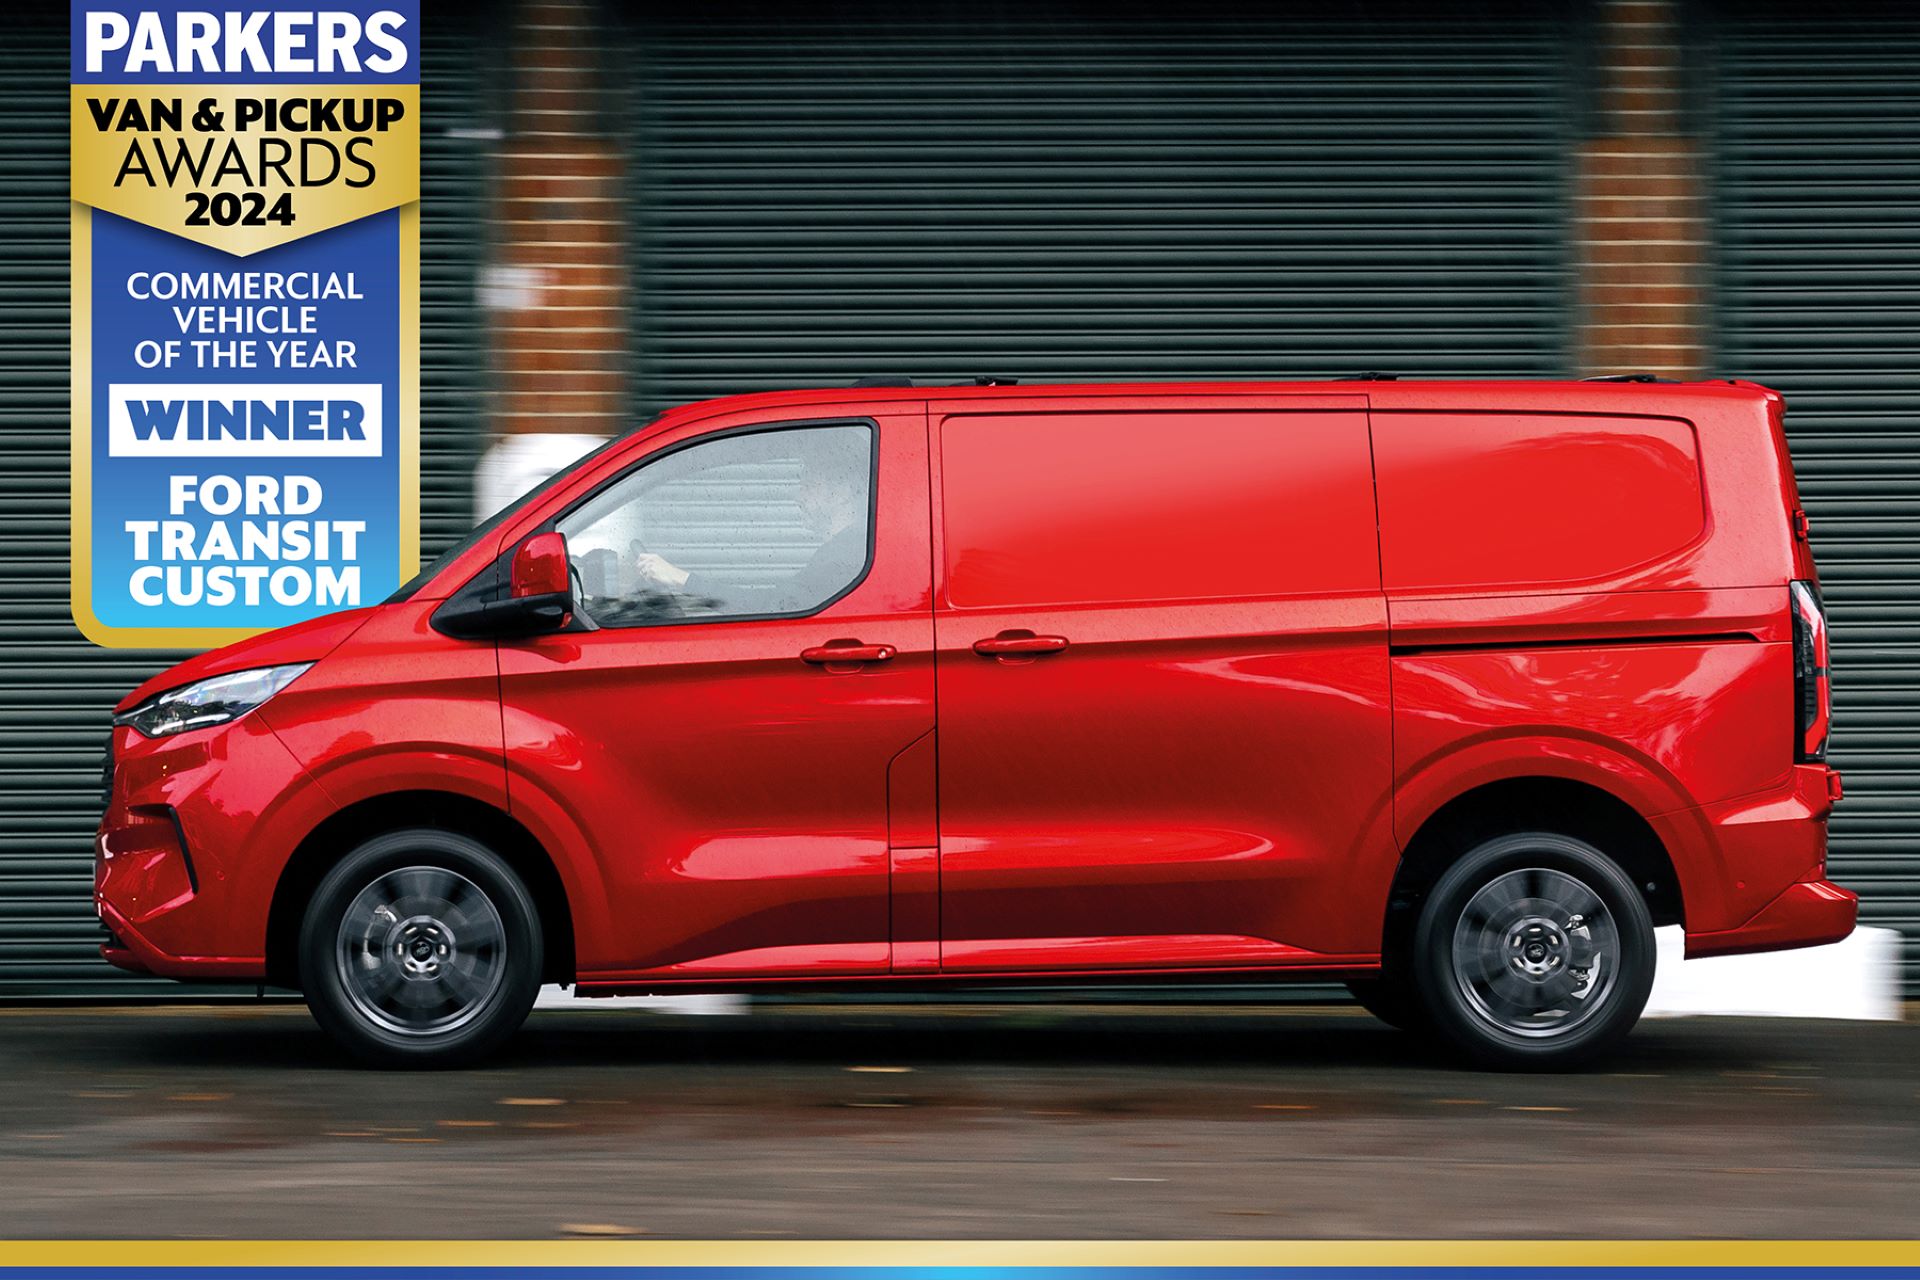 Ford Transit Custom is the Parkers Commercial Vehicle of The Year 2024